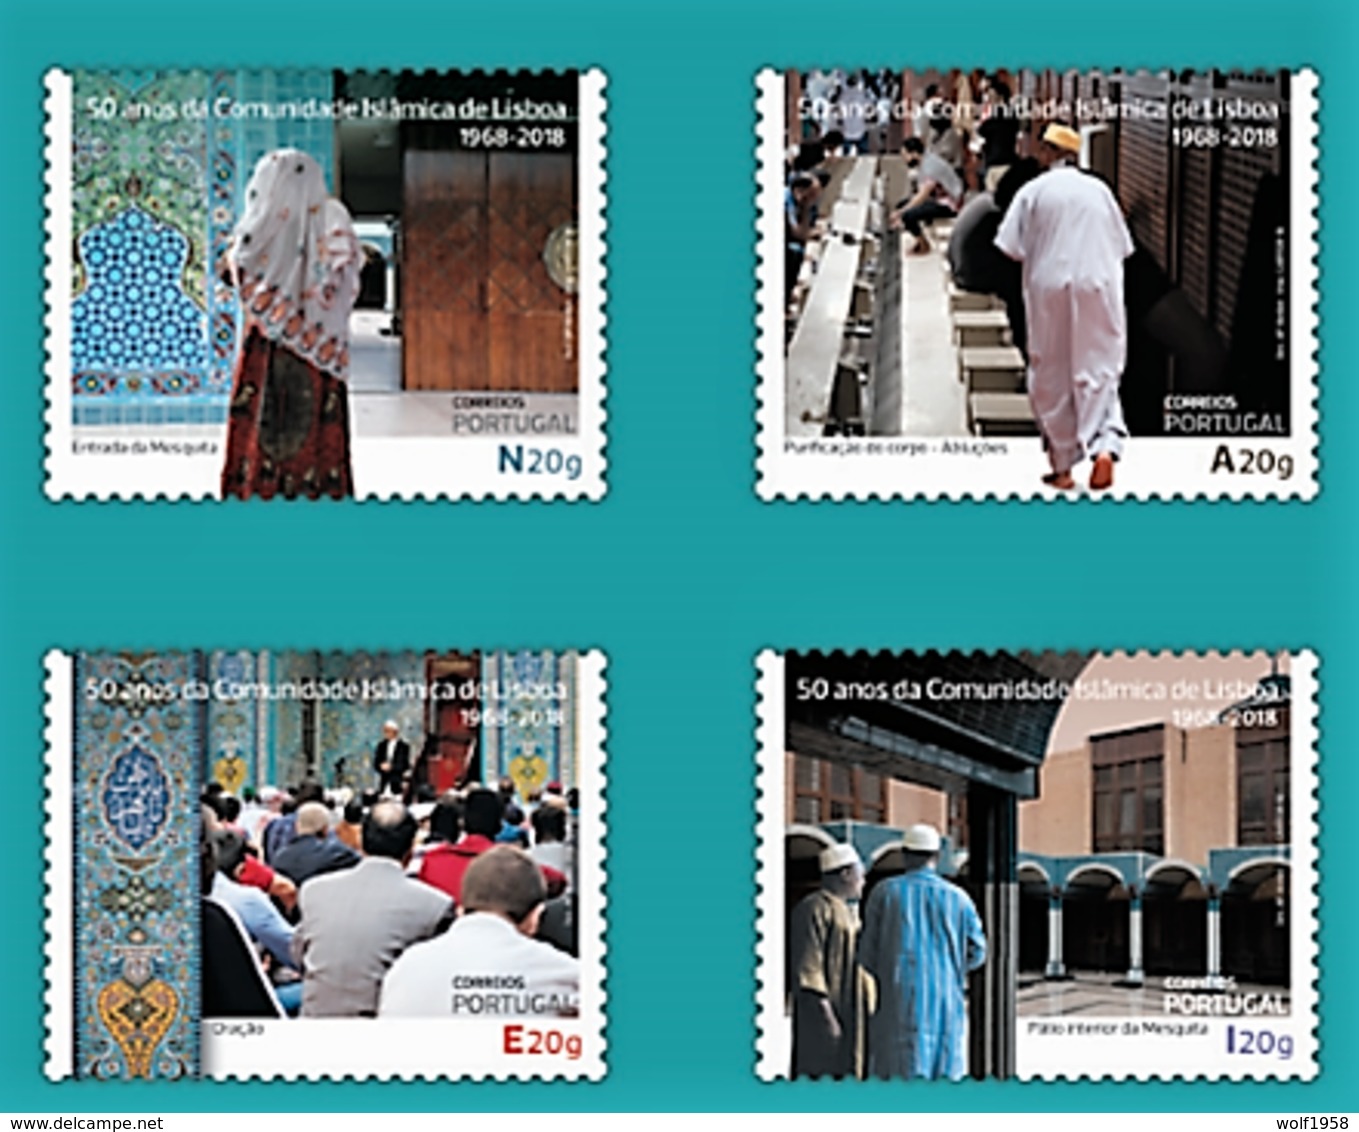 PORTUGAL 50 YEARS OF ISLAMIC COMMUNITY OF LISBON 4 MNH STAMPS SET 2018 - Oblitérés